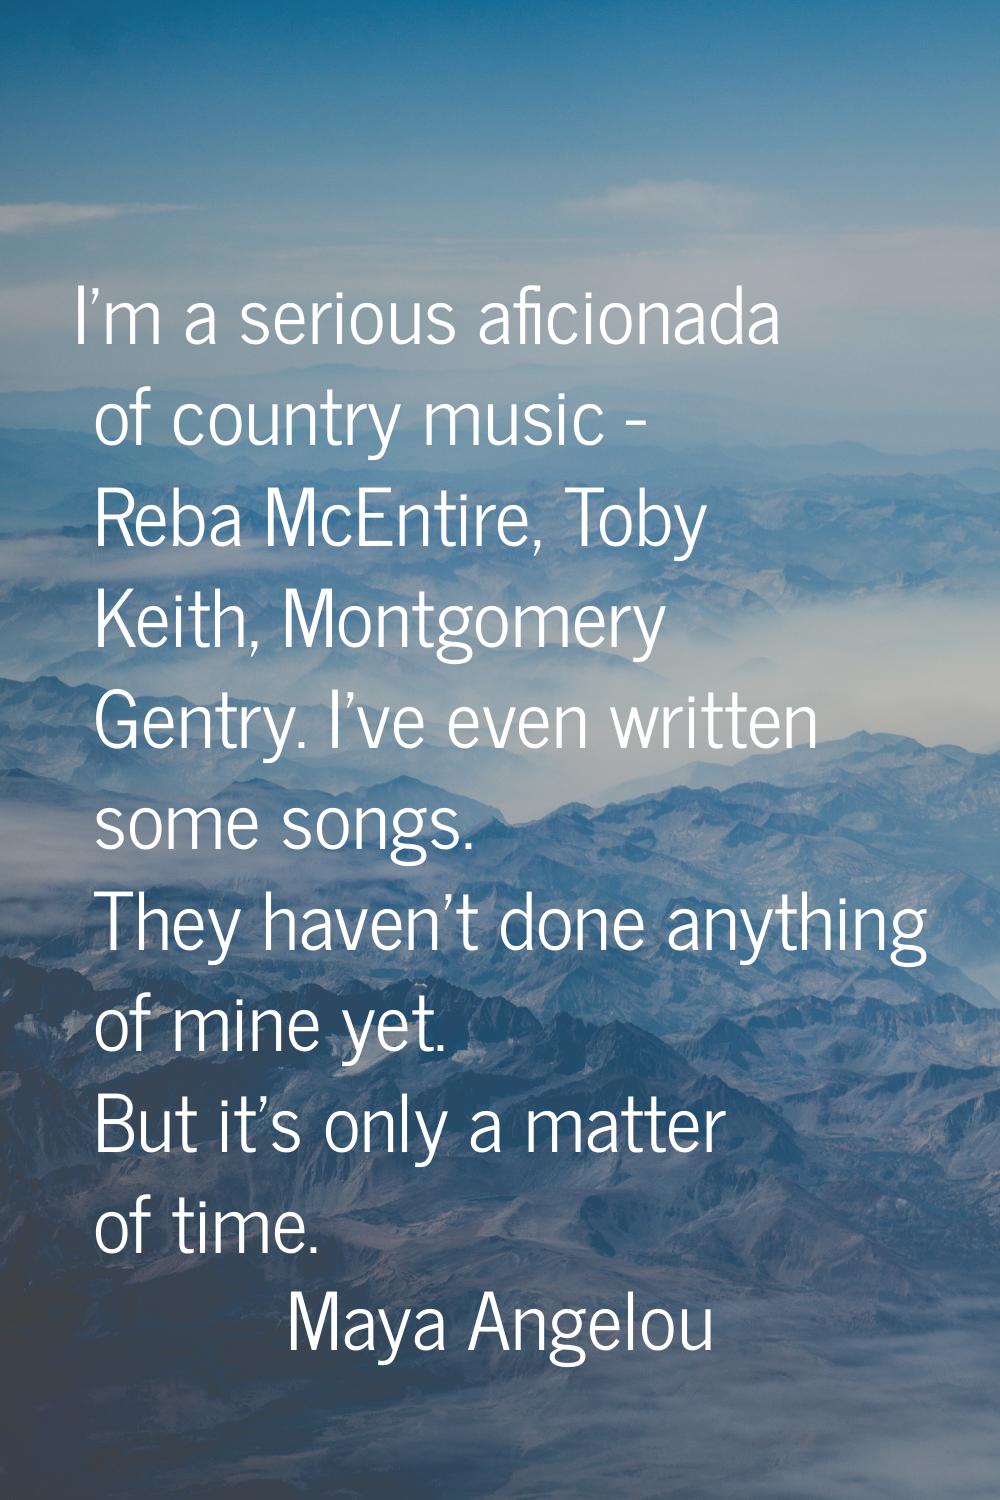 I'm a serious aficionada of country music - Reba McEntire, Toby Keith, Montgomery Gentry. I've even